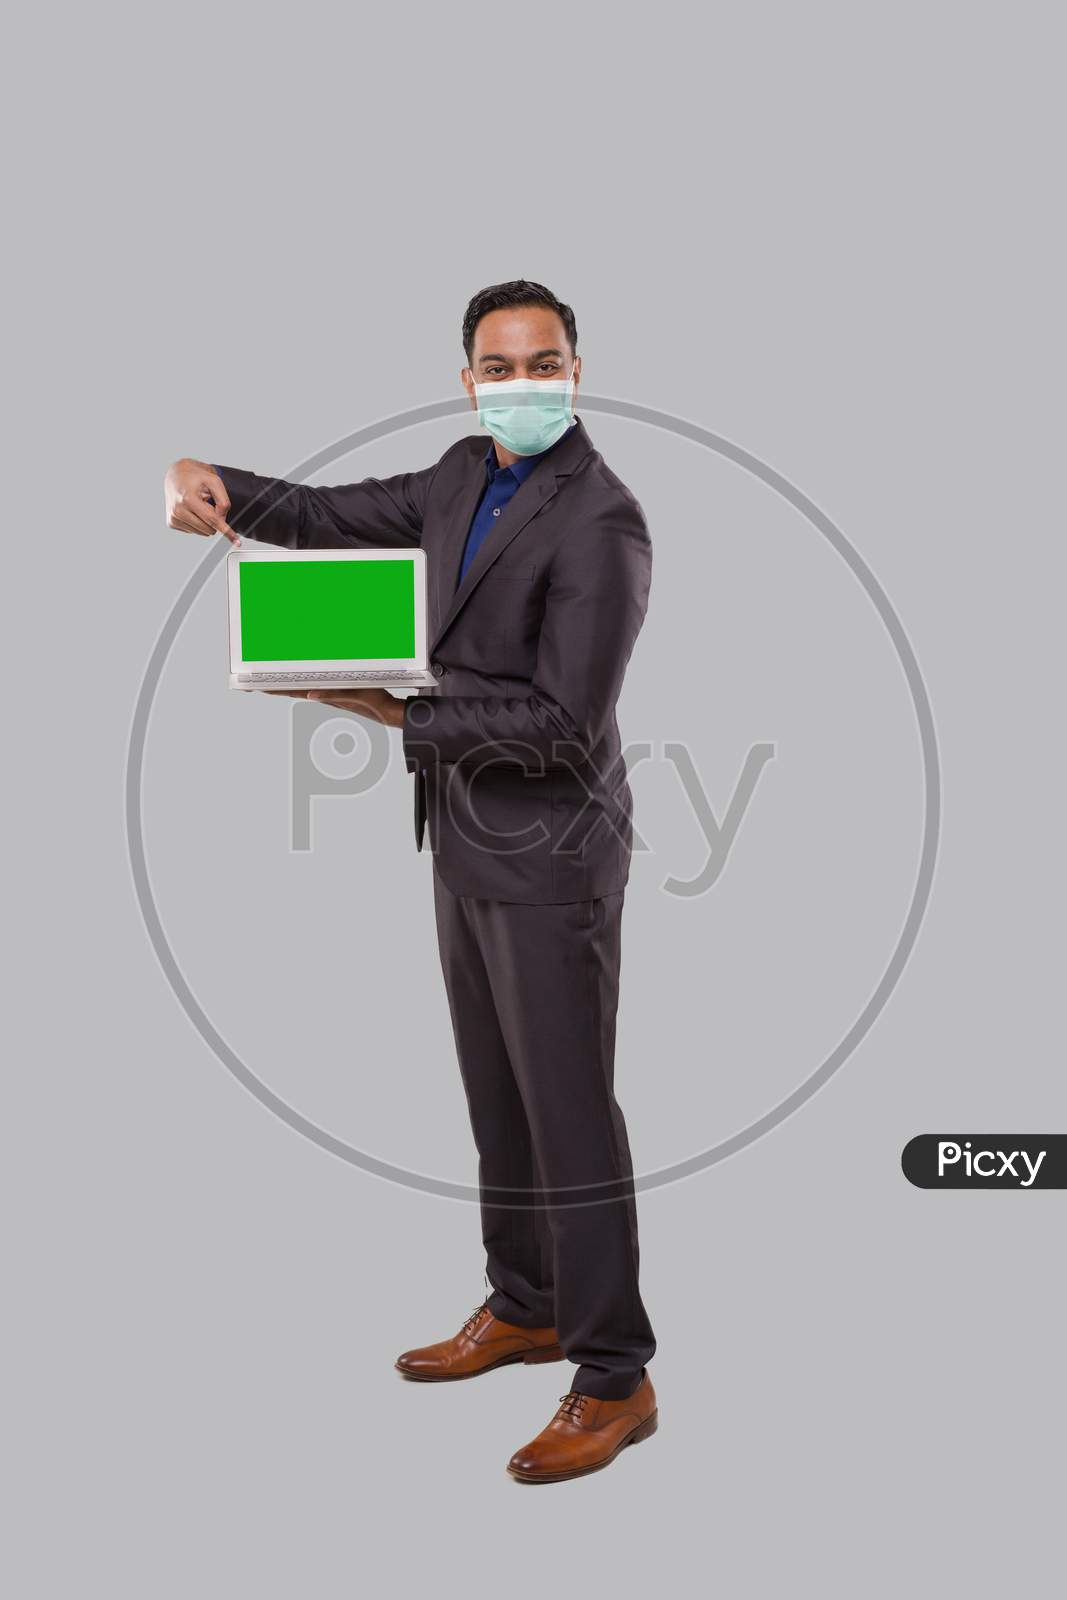 Businessman Pointing At Laptop Green Screen Isolated Wearing Medical Mask And Gloves. Indian Business Man With Laptop In Hands. Online Business Concept